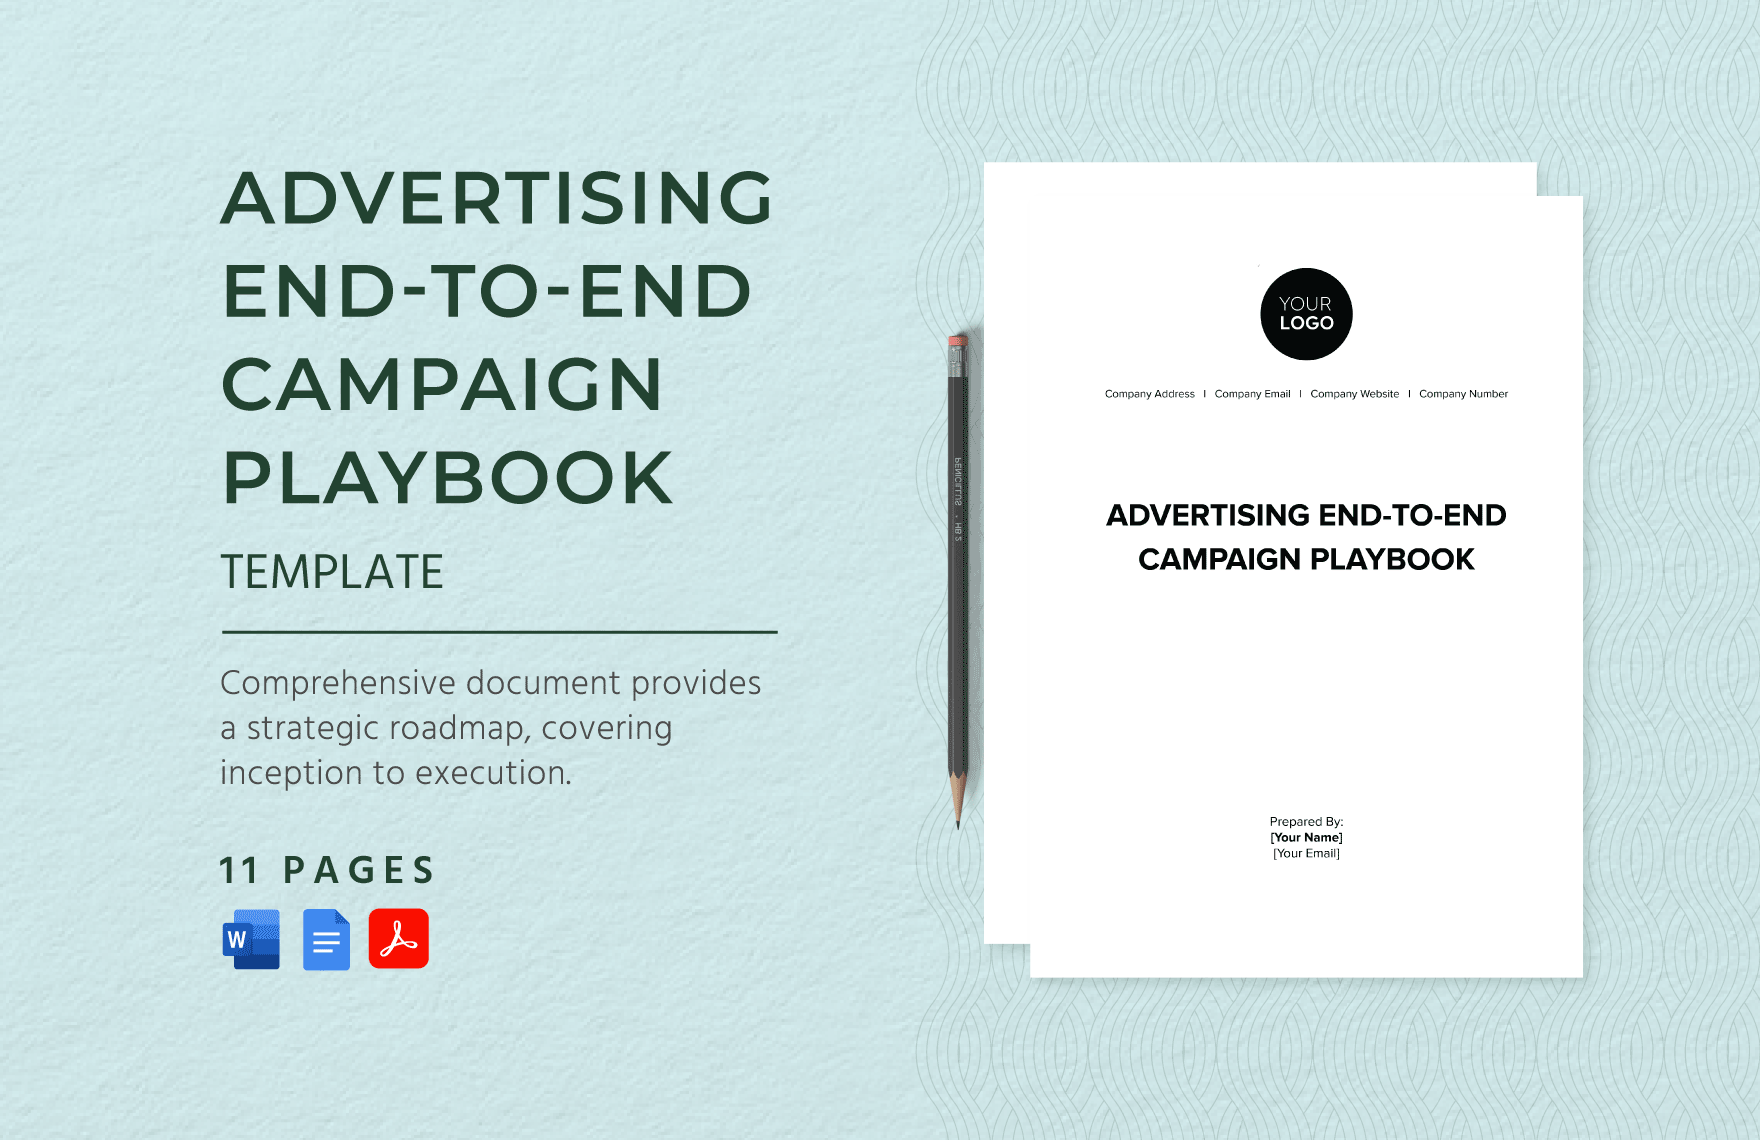 Advertising End-to-End Campaign Playbook Template